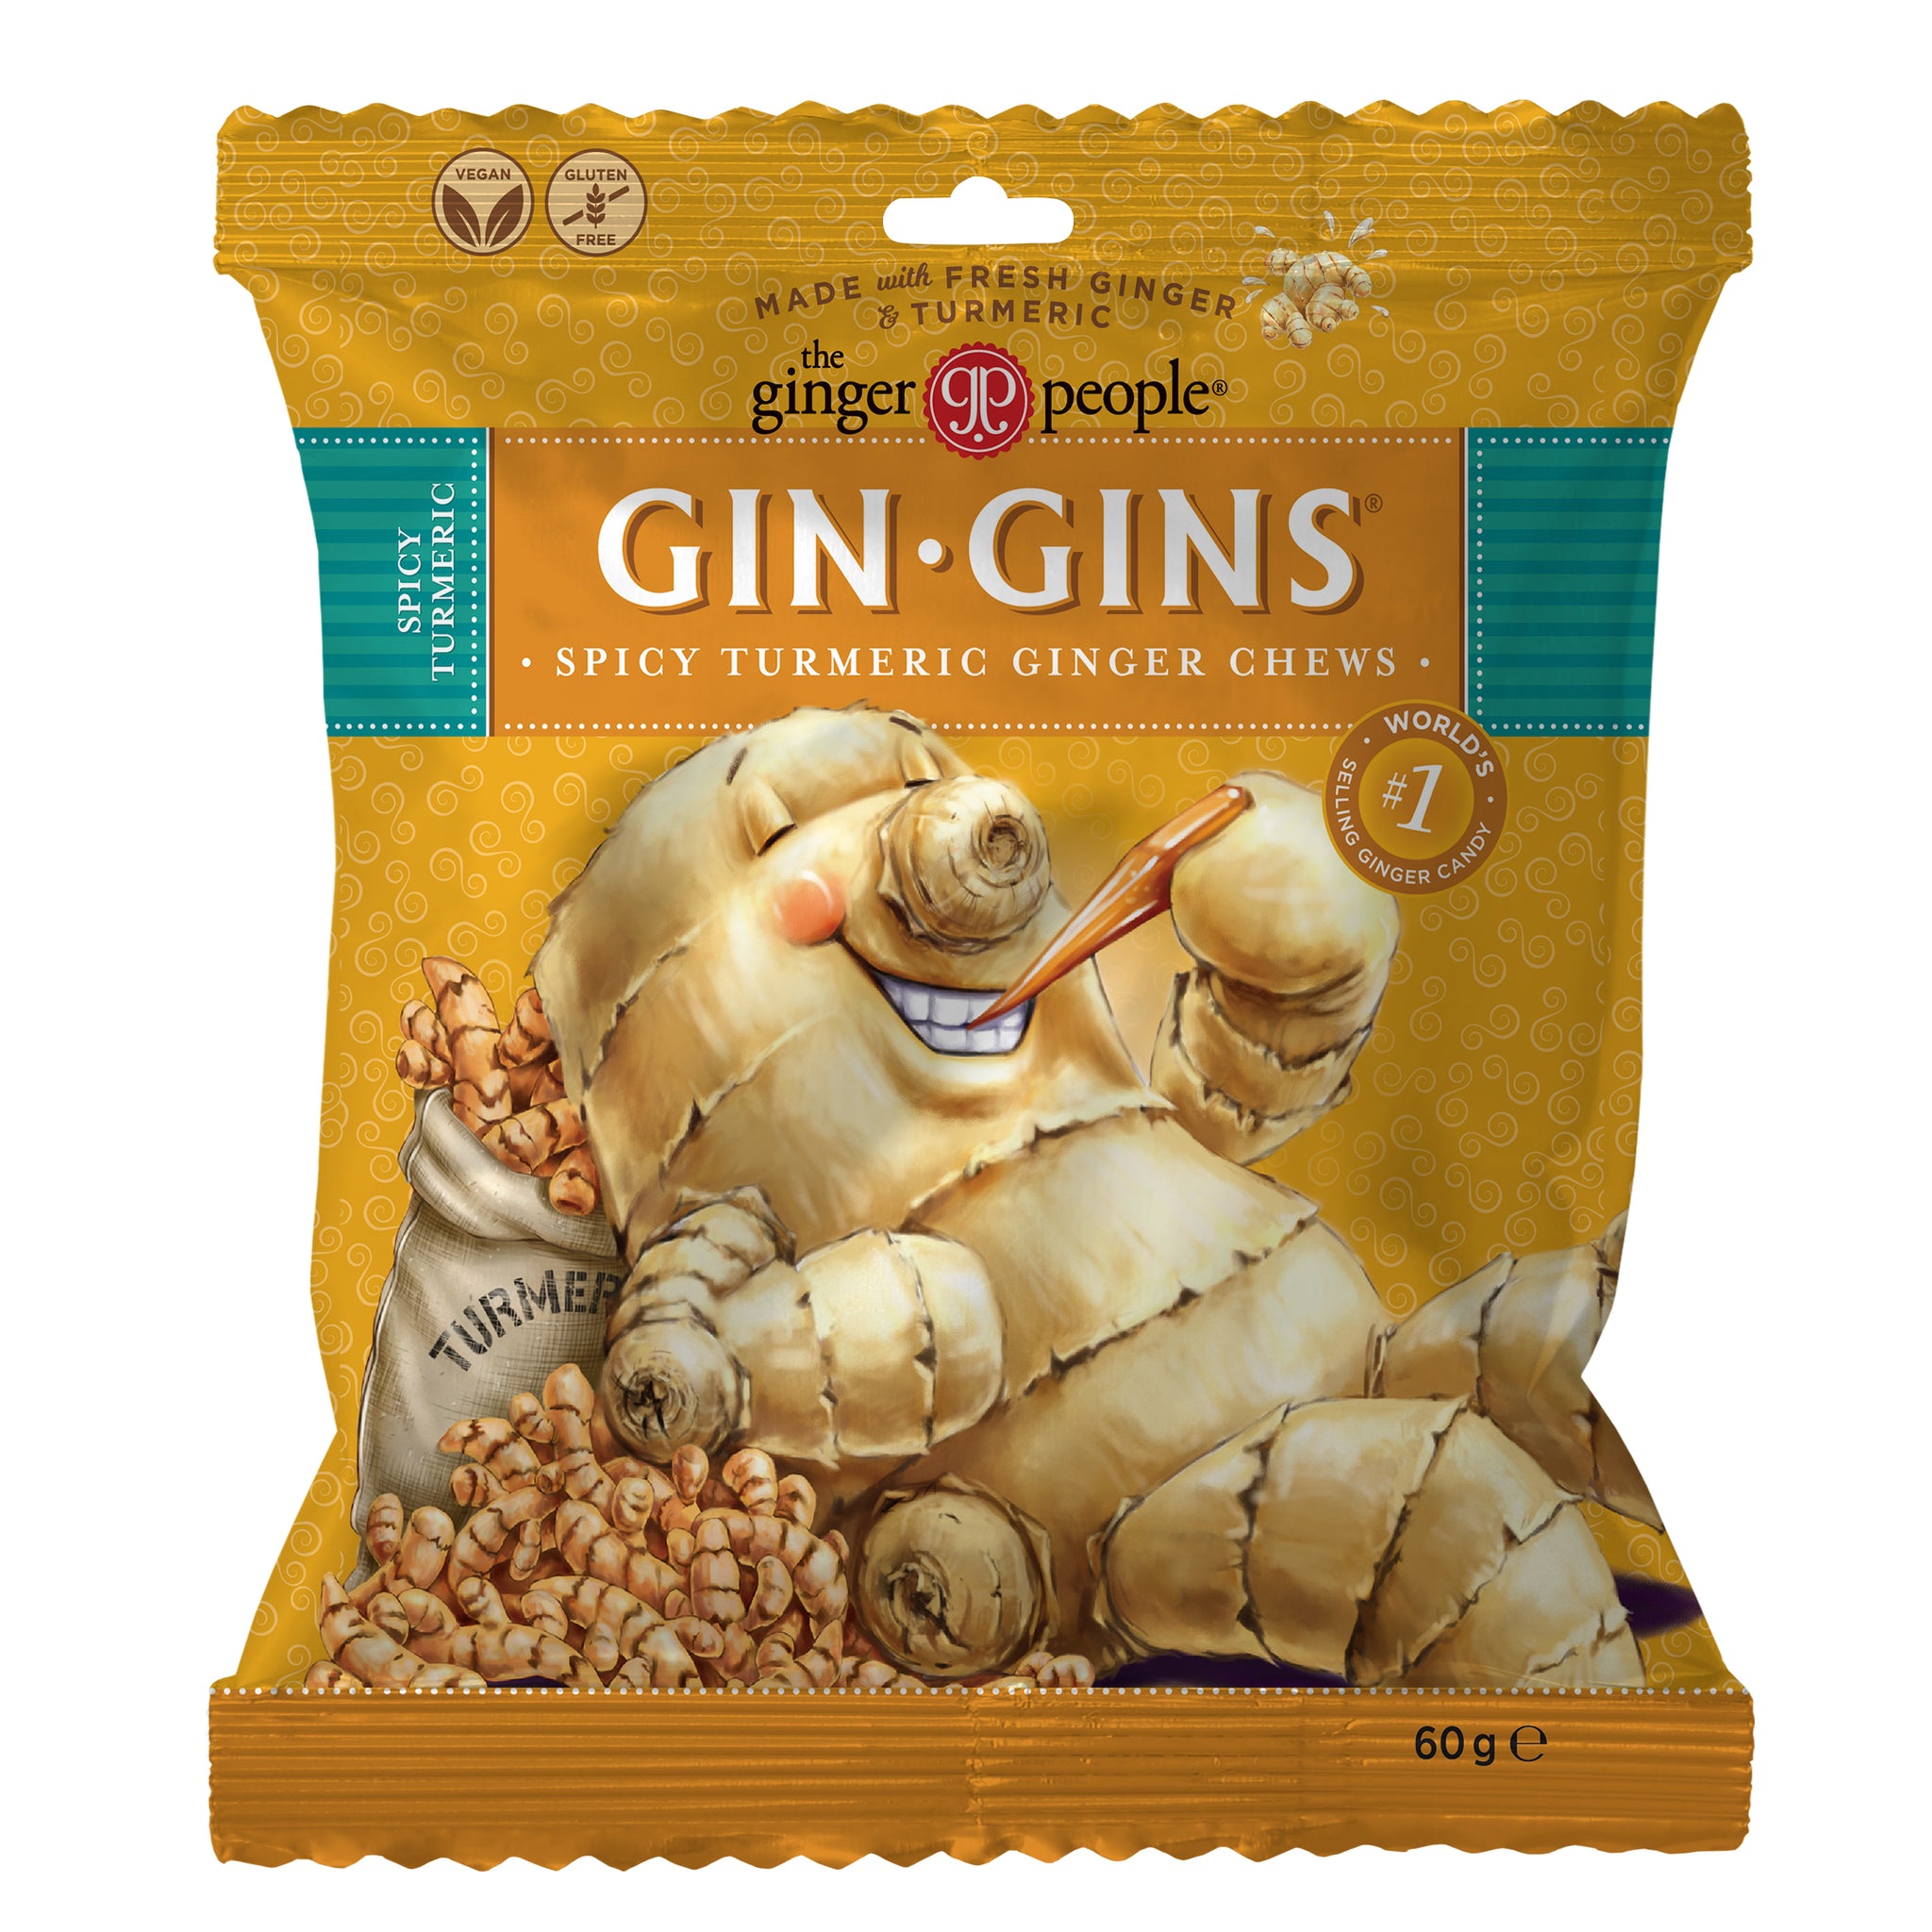 Gin-Gins Spicy Turmeric Ginger Chews Bag - 12 x 60g